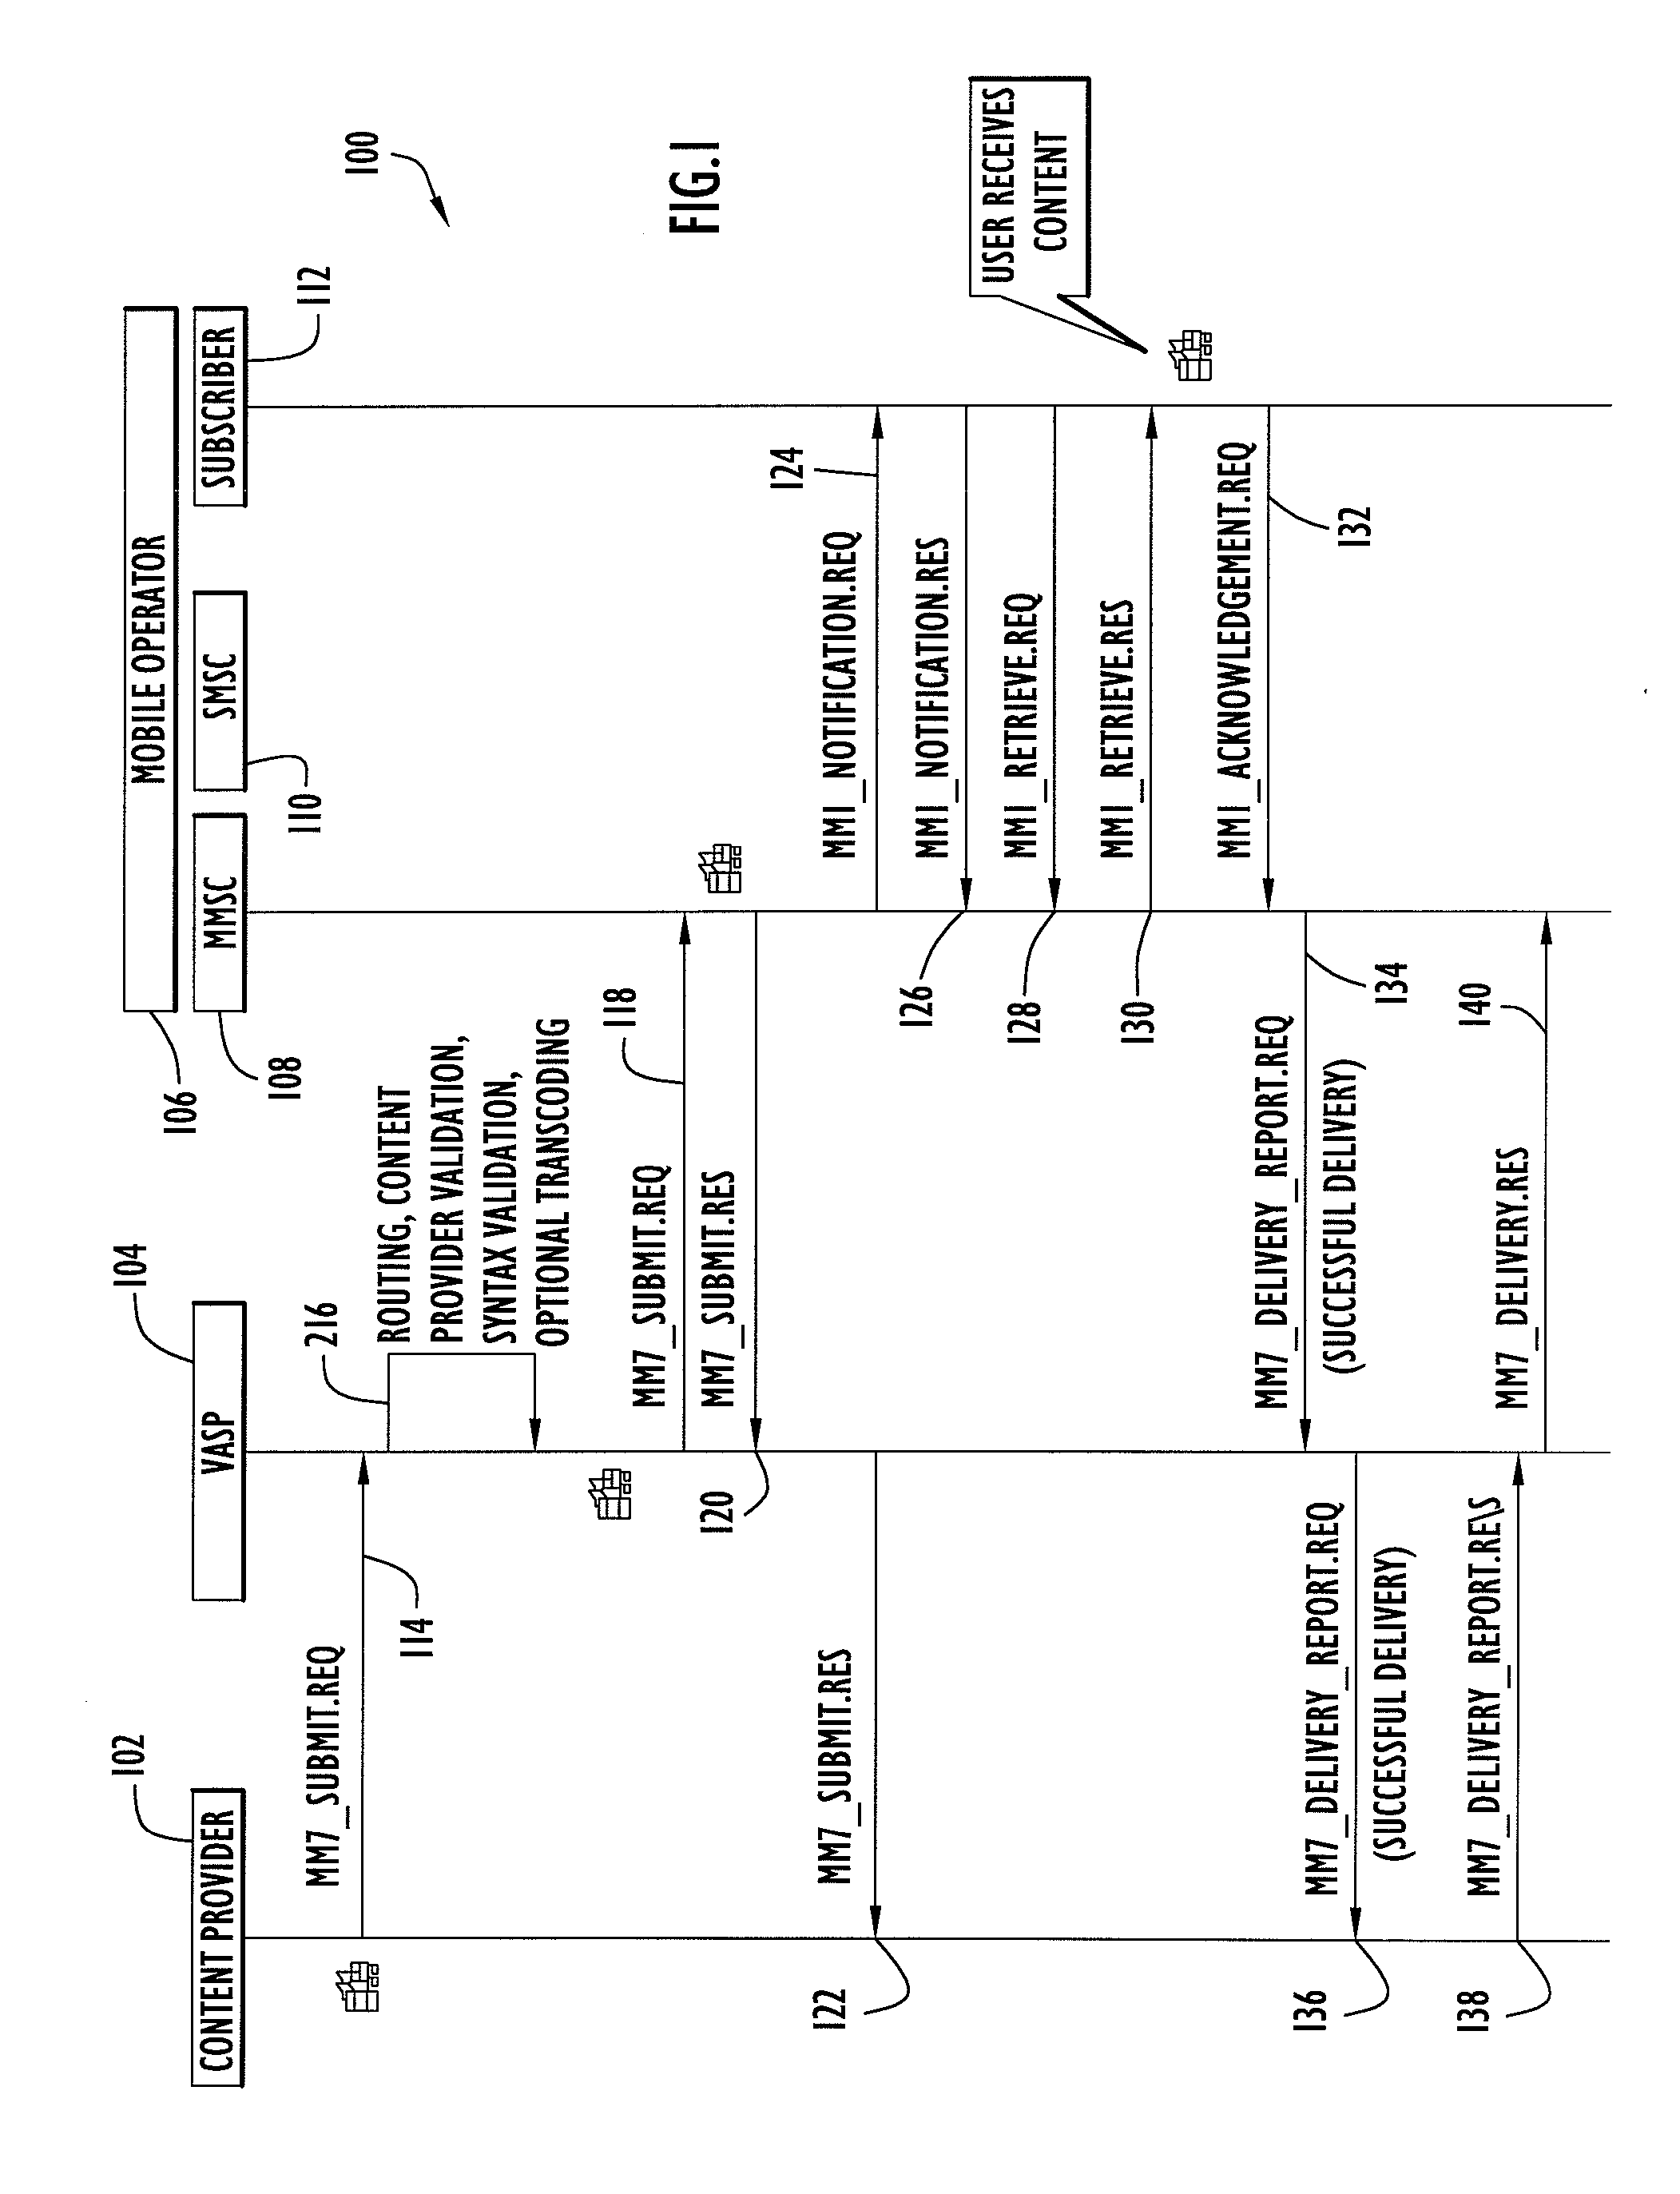 System and method for providing feedback to wireless device users